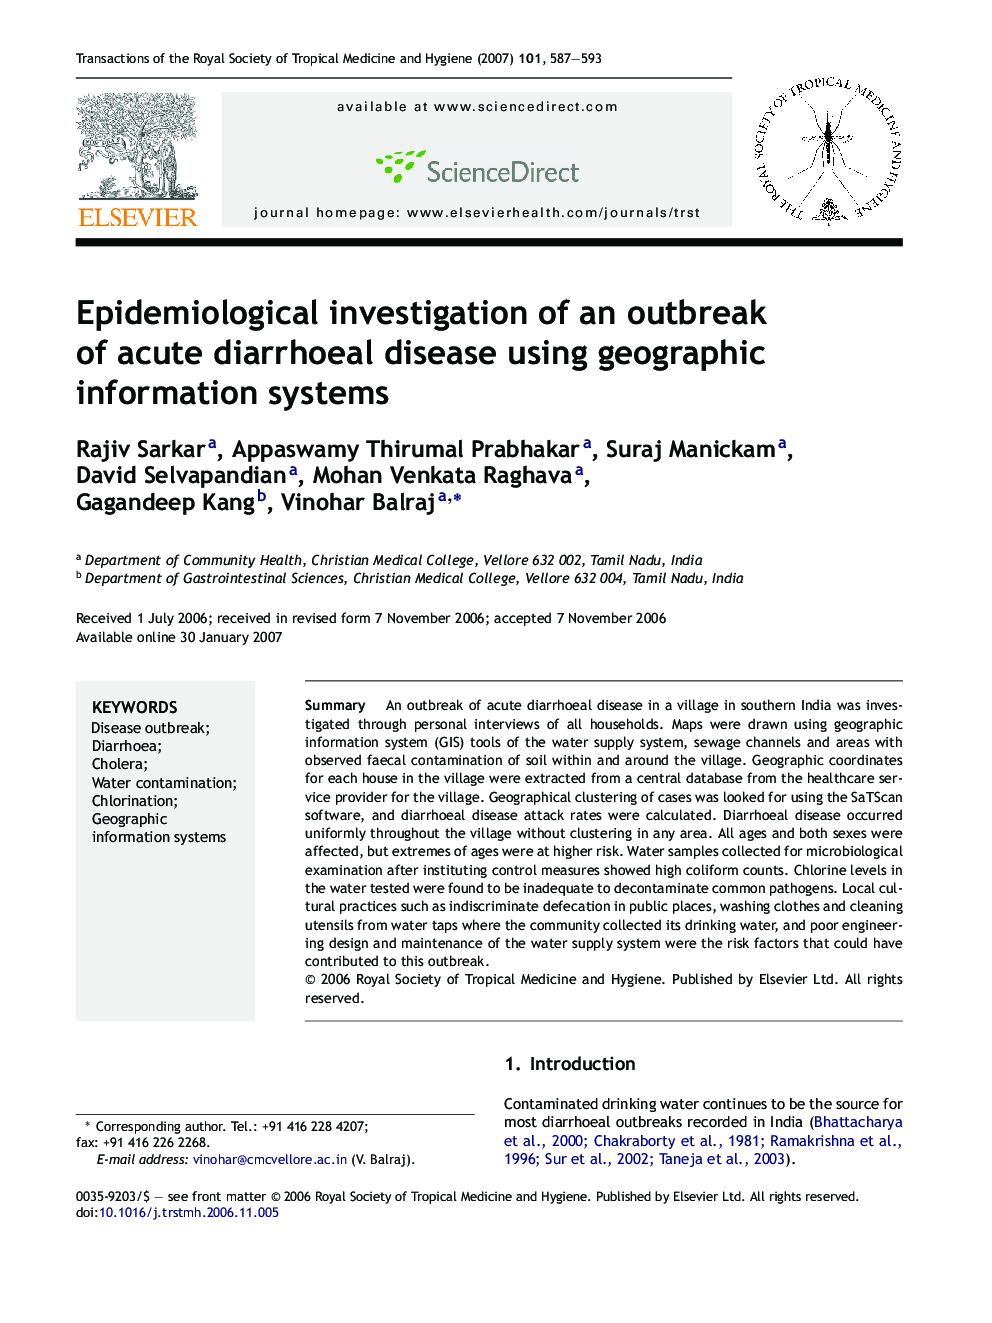 Epidemiological investigation of an outbreak of acute diarrhoeal disease using geographic information systems